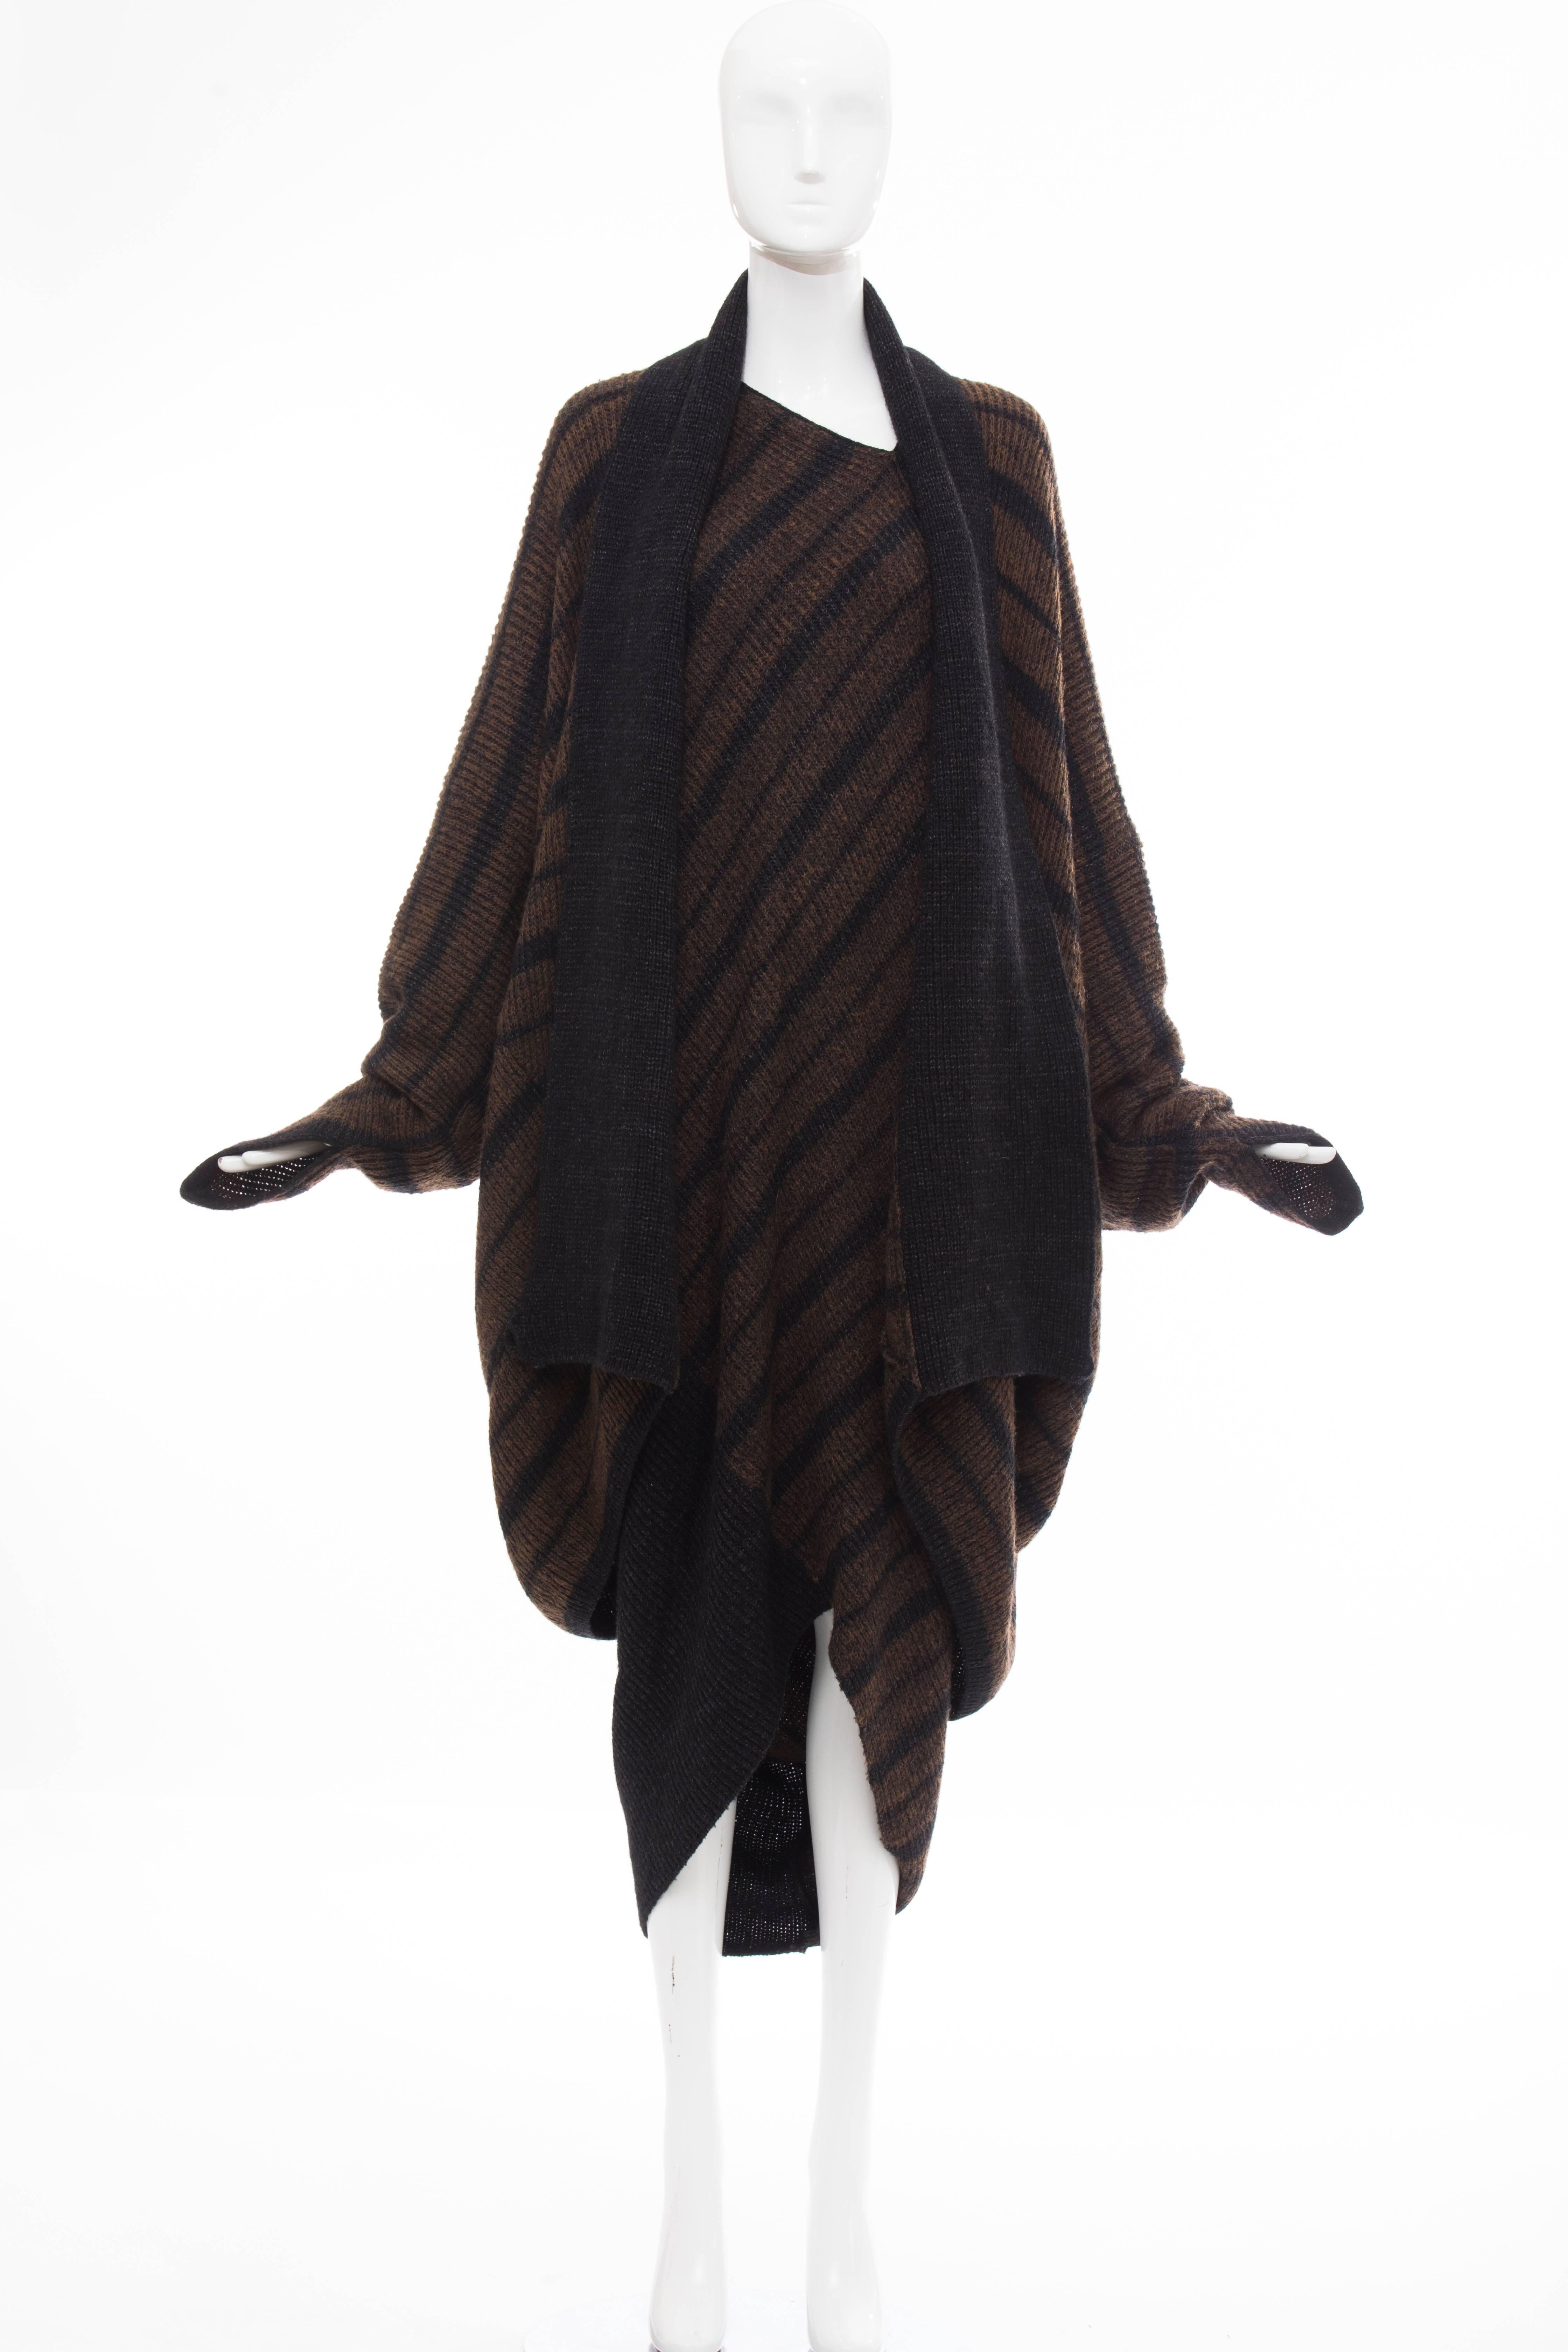 Issey Miyake Striped Wool Sweater Dress Cocoon Cardigan Ensemble, Circa 1970s For Sale 1